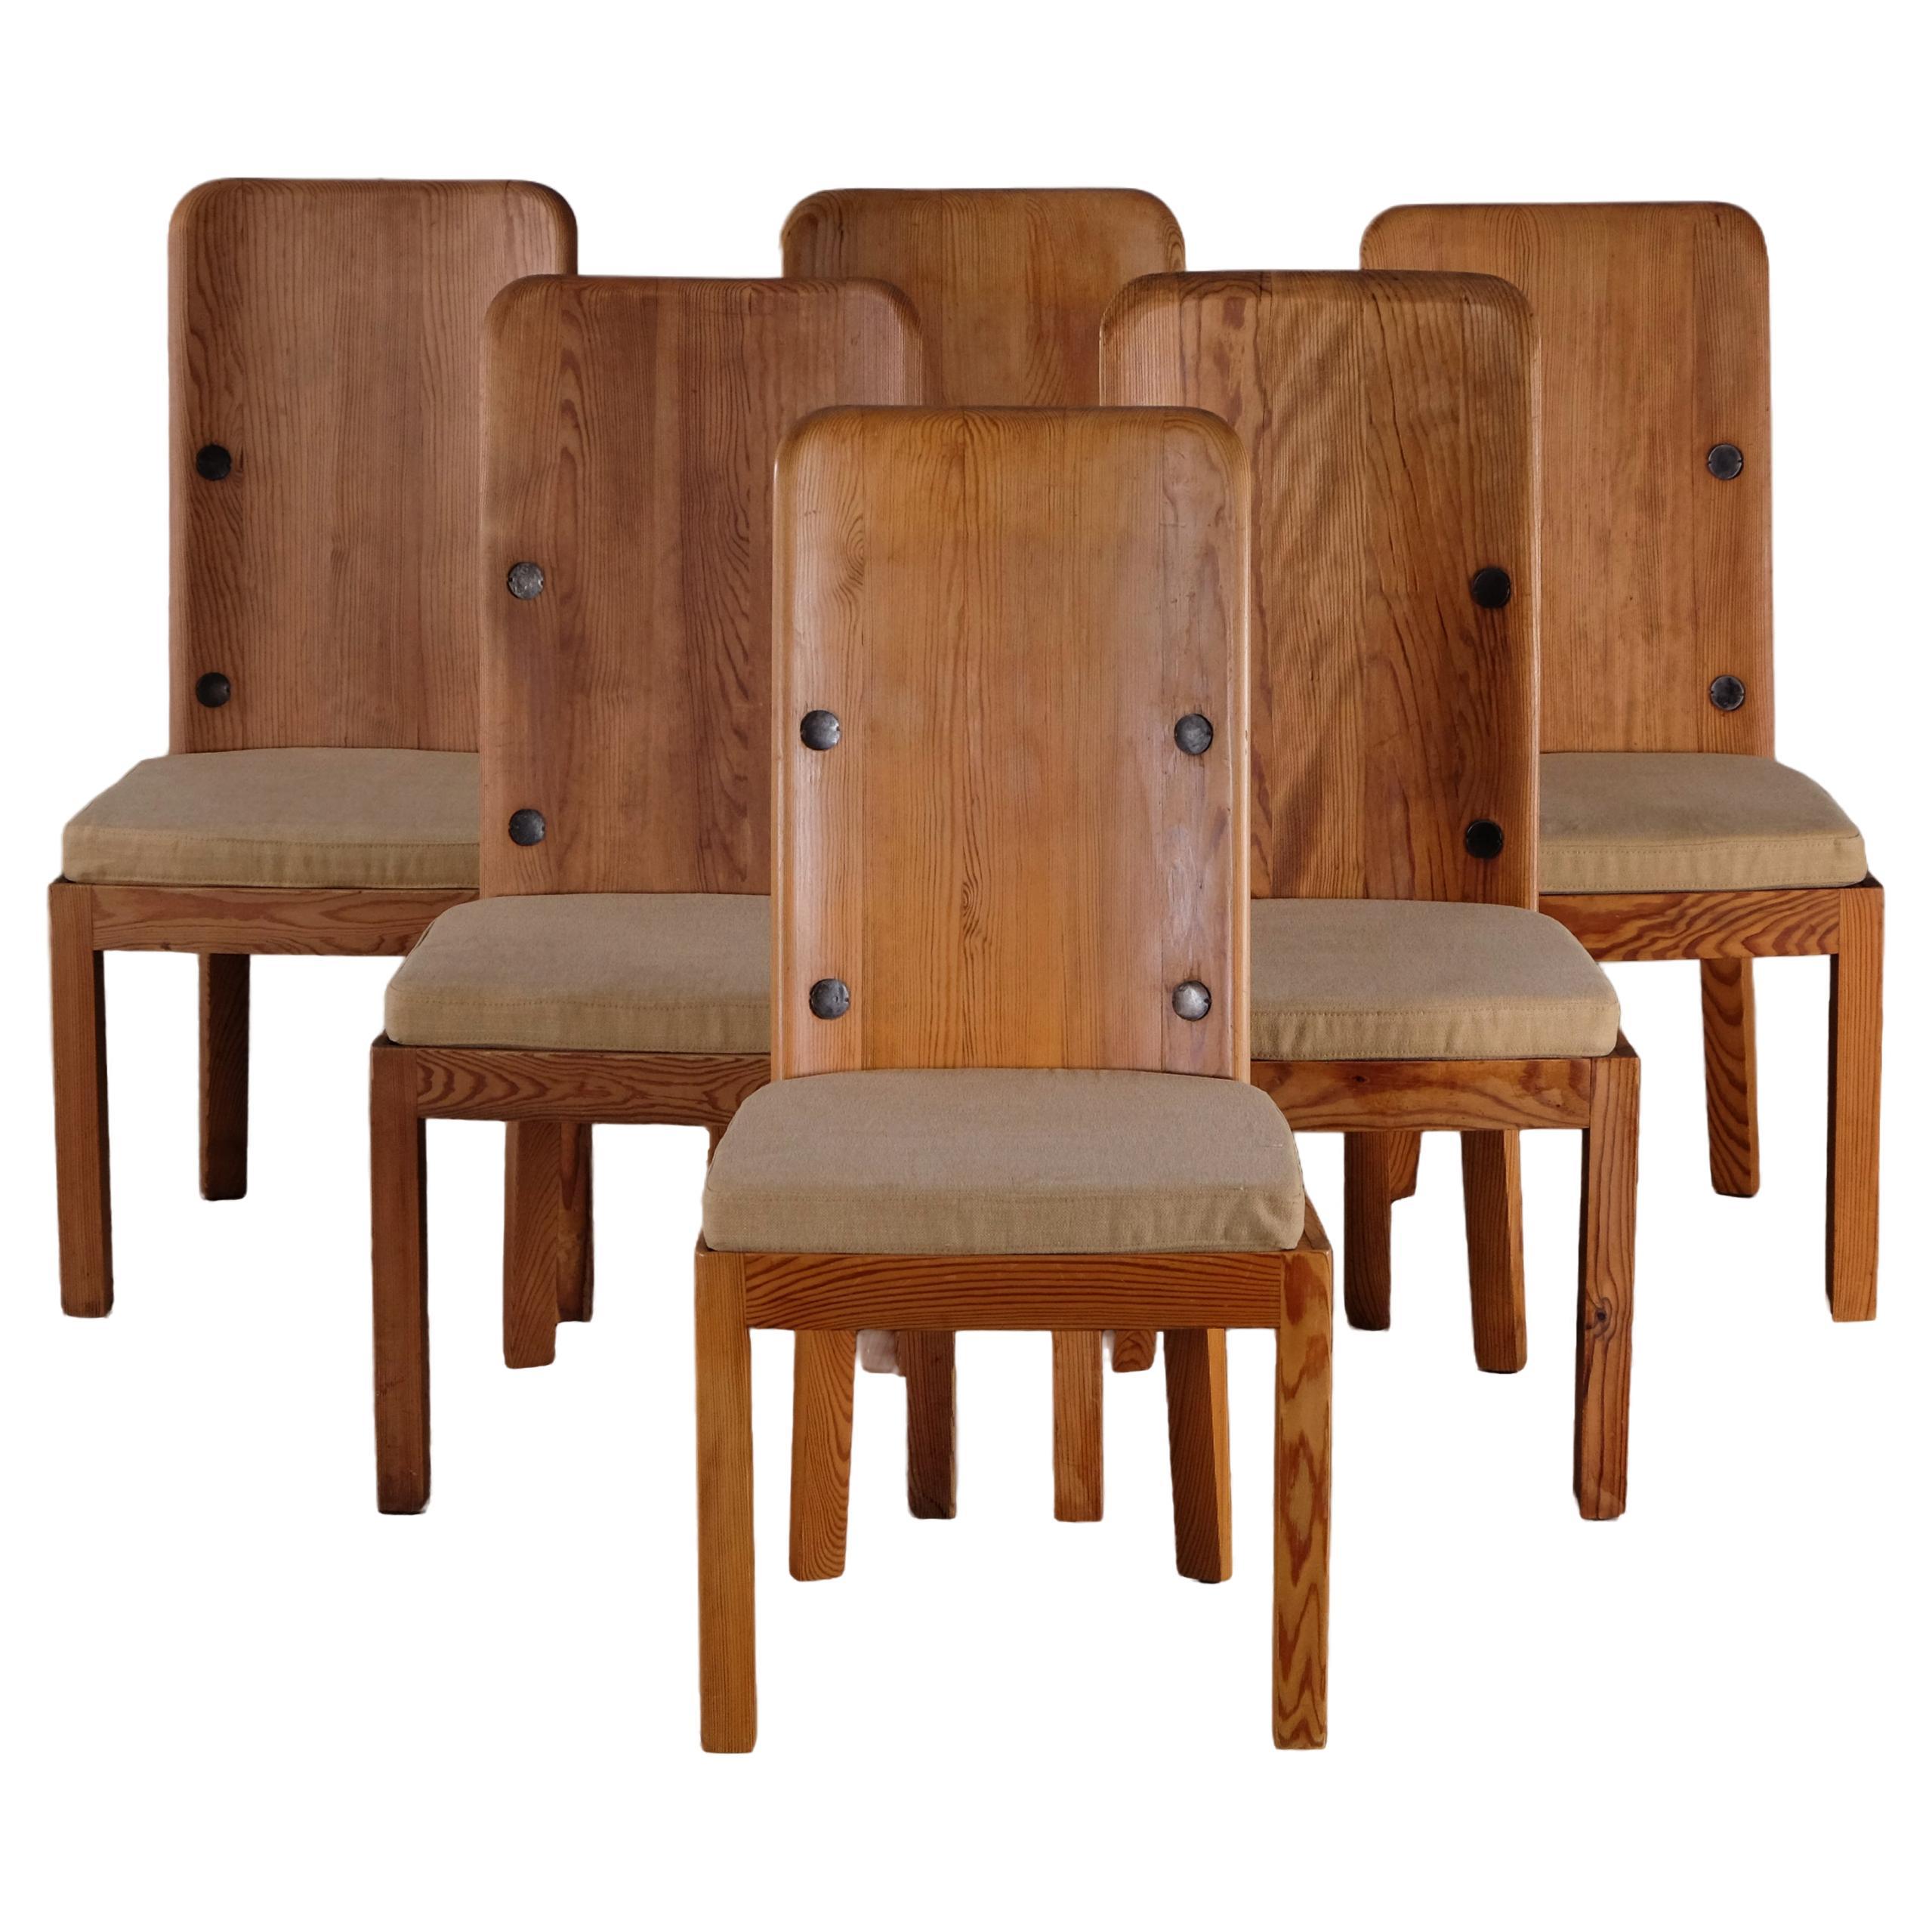 Set of 6 "Lovö" Chairs by Axel Einar-Hjorth, 1930s For Sale